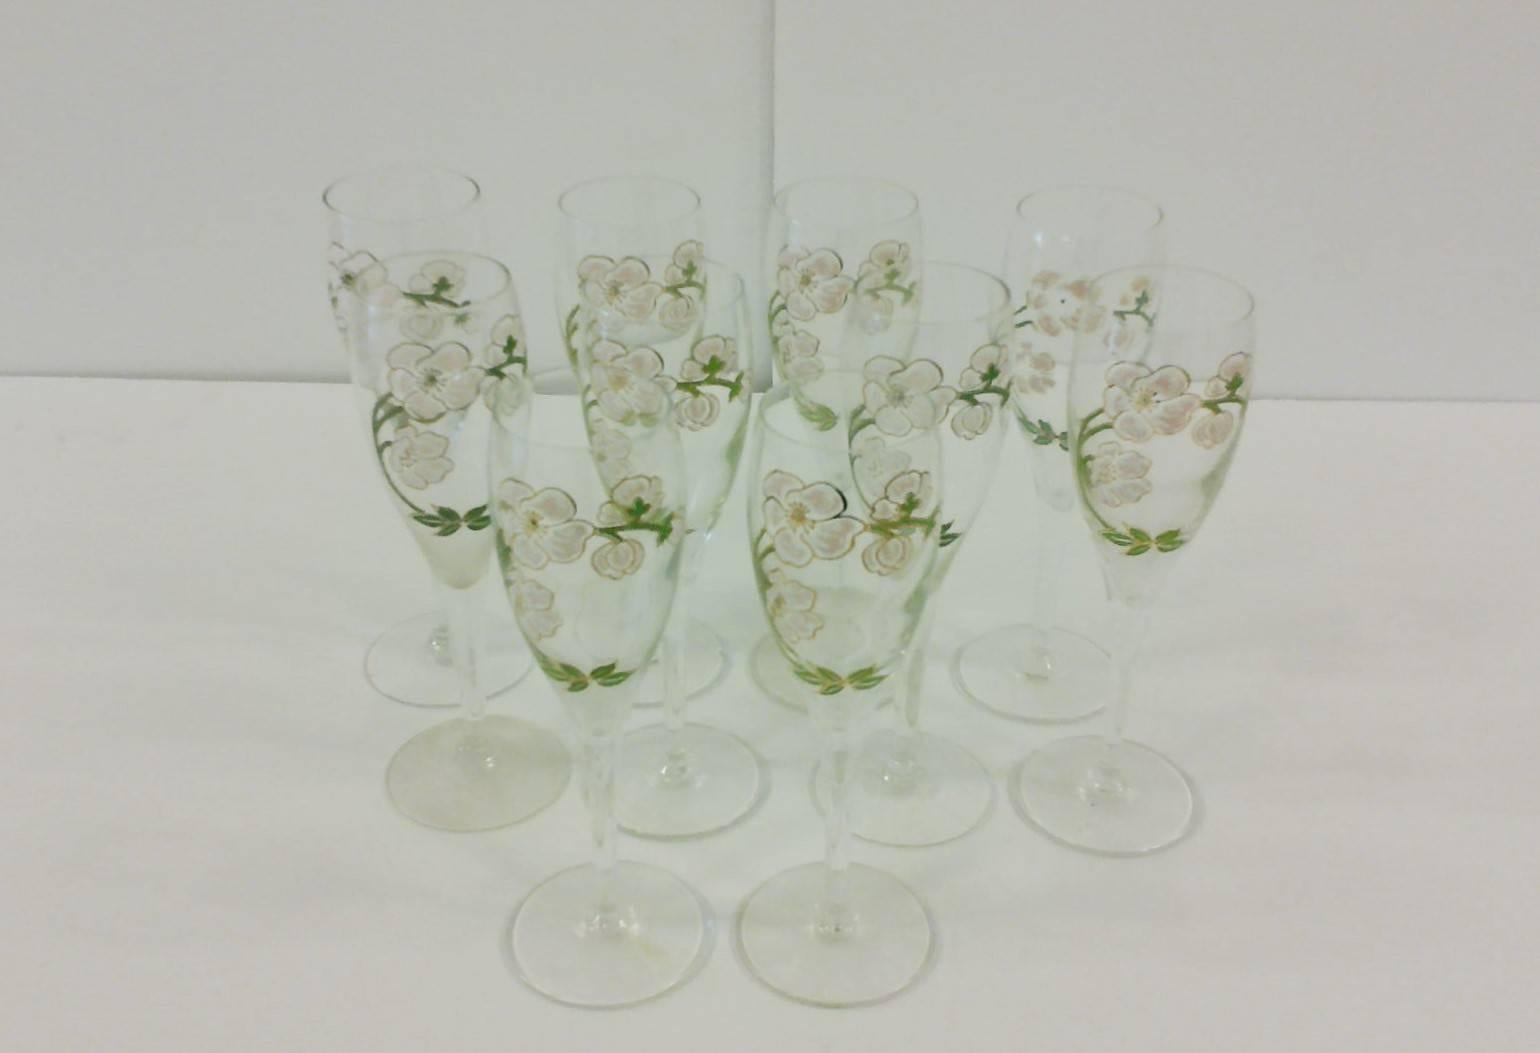 A beautiful set of ten (10) vintage Perrier-Jouet French champagne glasses. 
Beautiful and iconic floral motif. Set of 10 available here online. By request, set can be made available by appointment to the Trade (in New York.) 